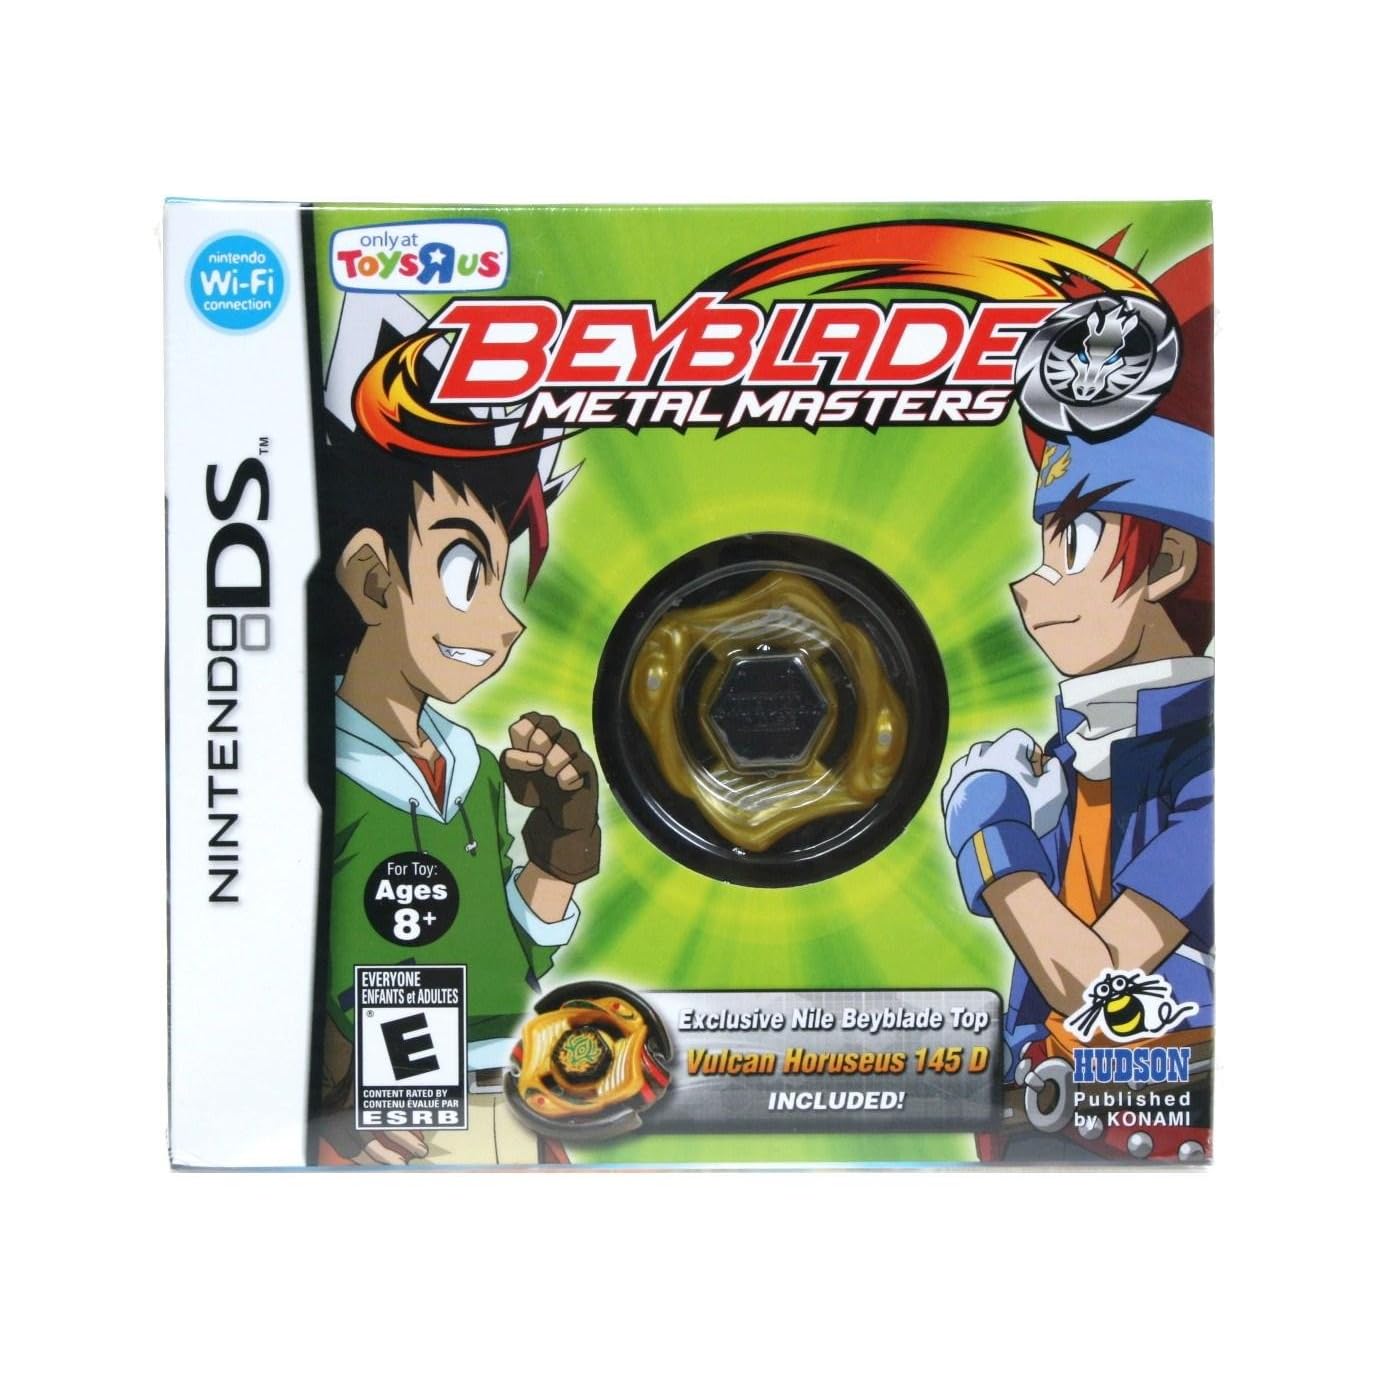 Beyblade: Metal Fusion (Collector's Edition) for Nintendo DS